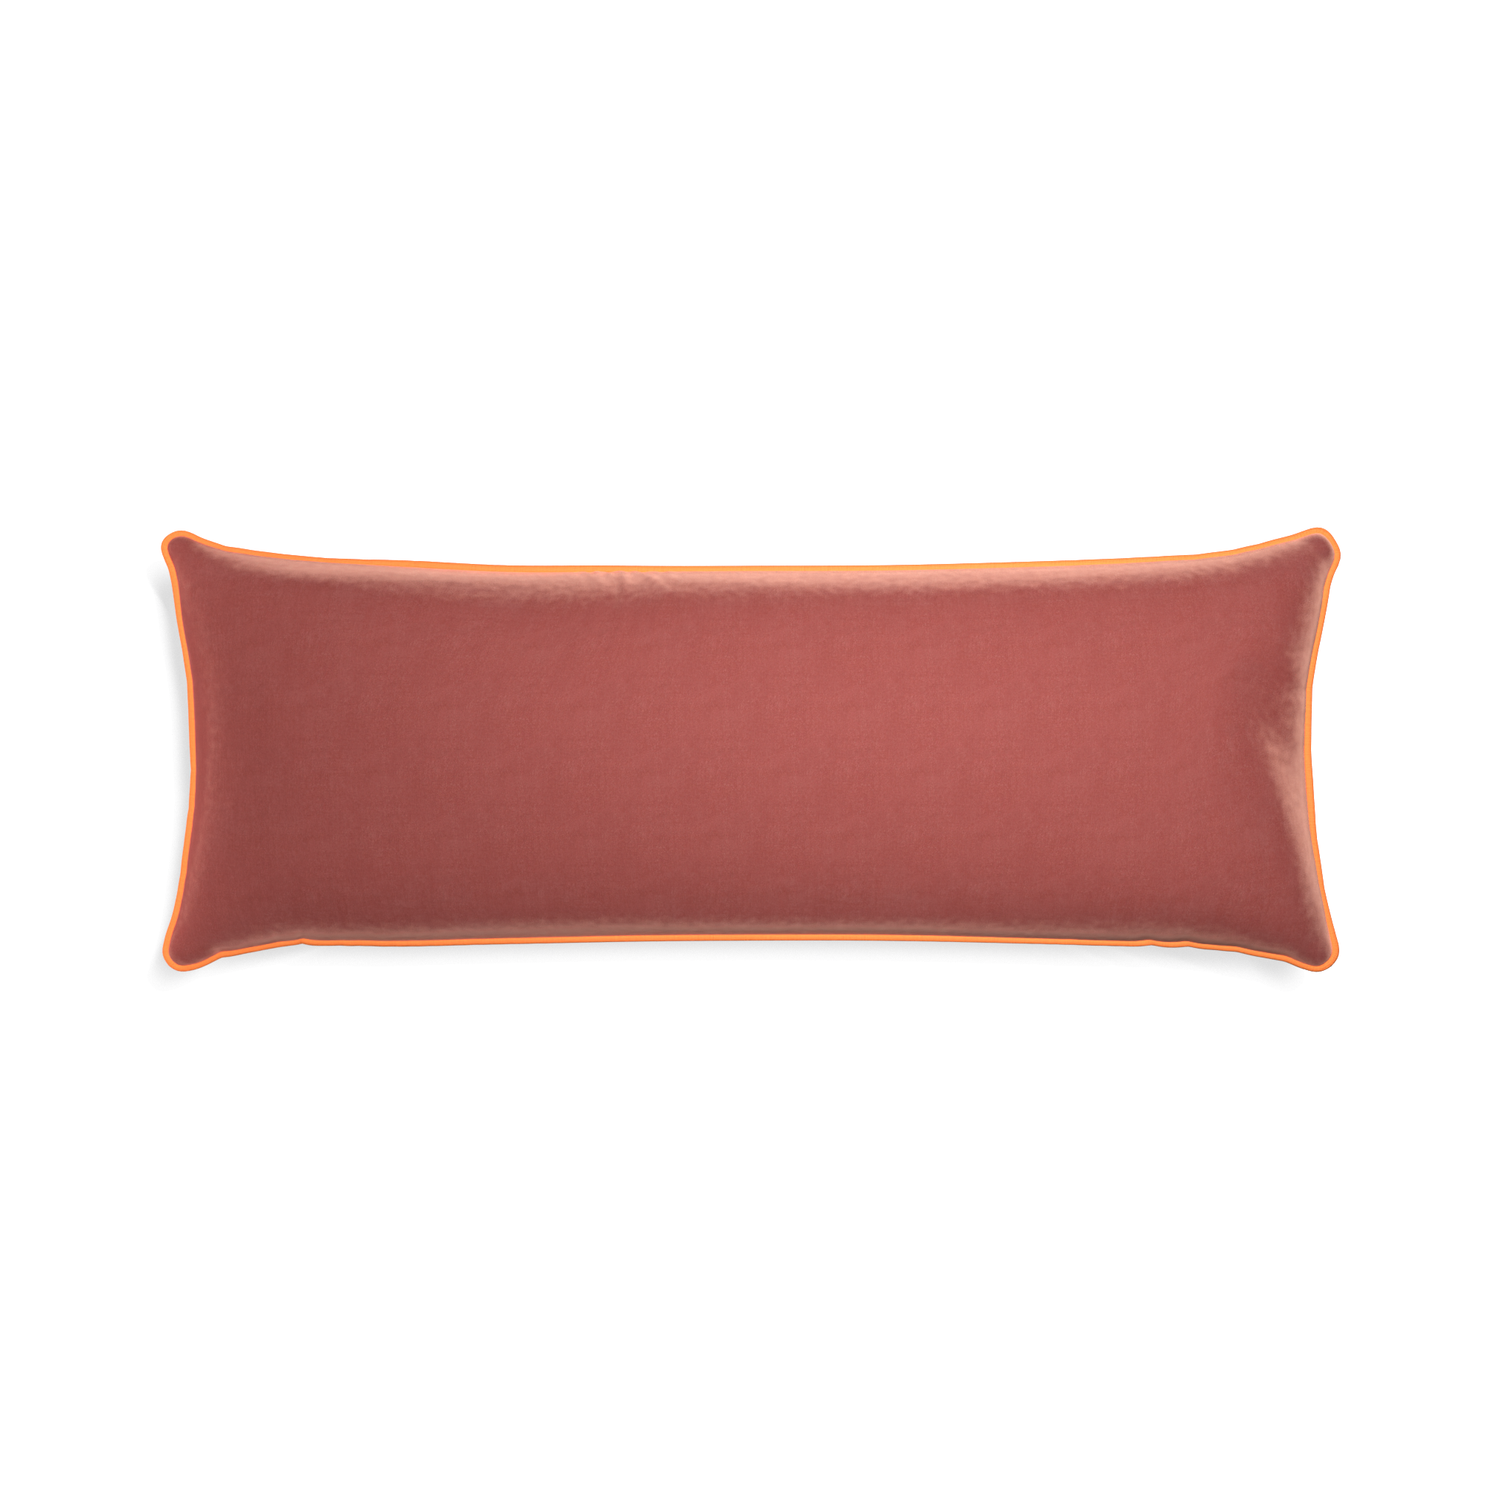 Xl-lumbar cosmo velvet custom pillow with clementine piping on white background